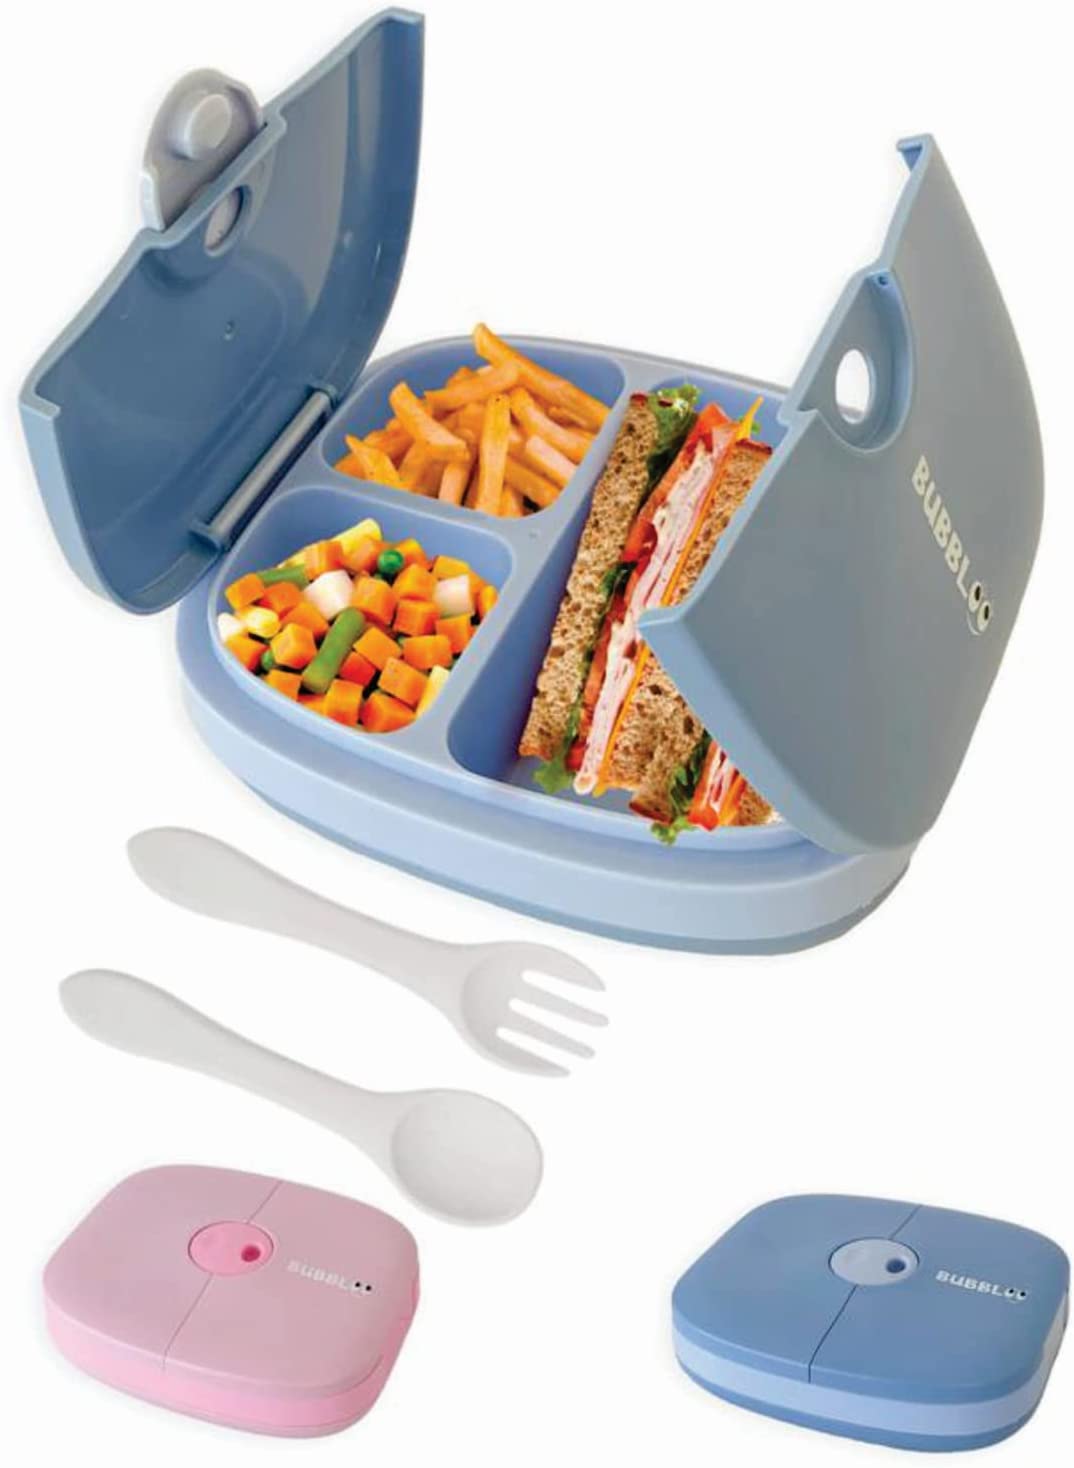 Lunch and Bento Box for Kids. bento lunch boxes kids,back to